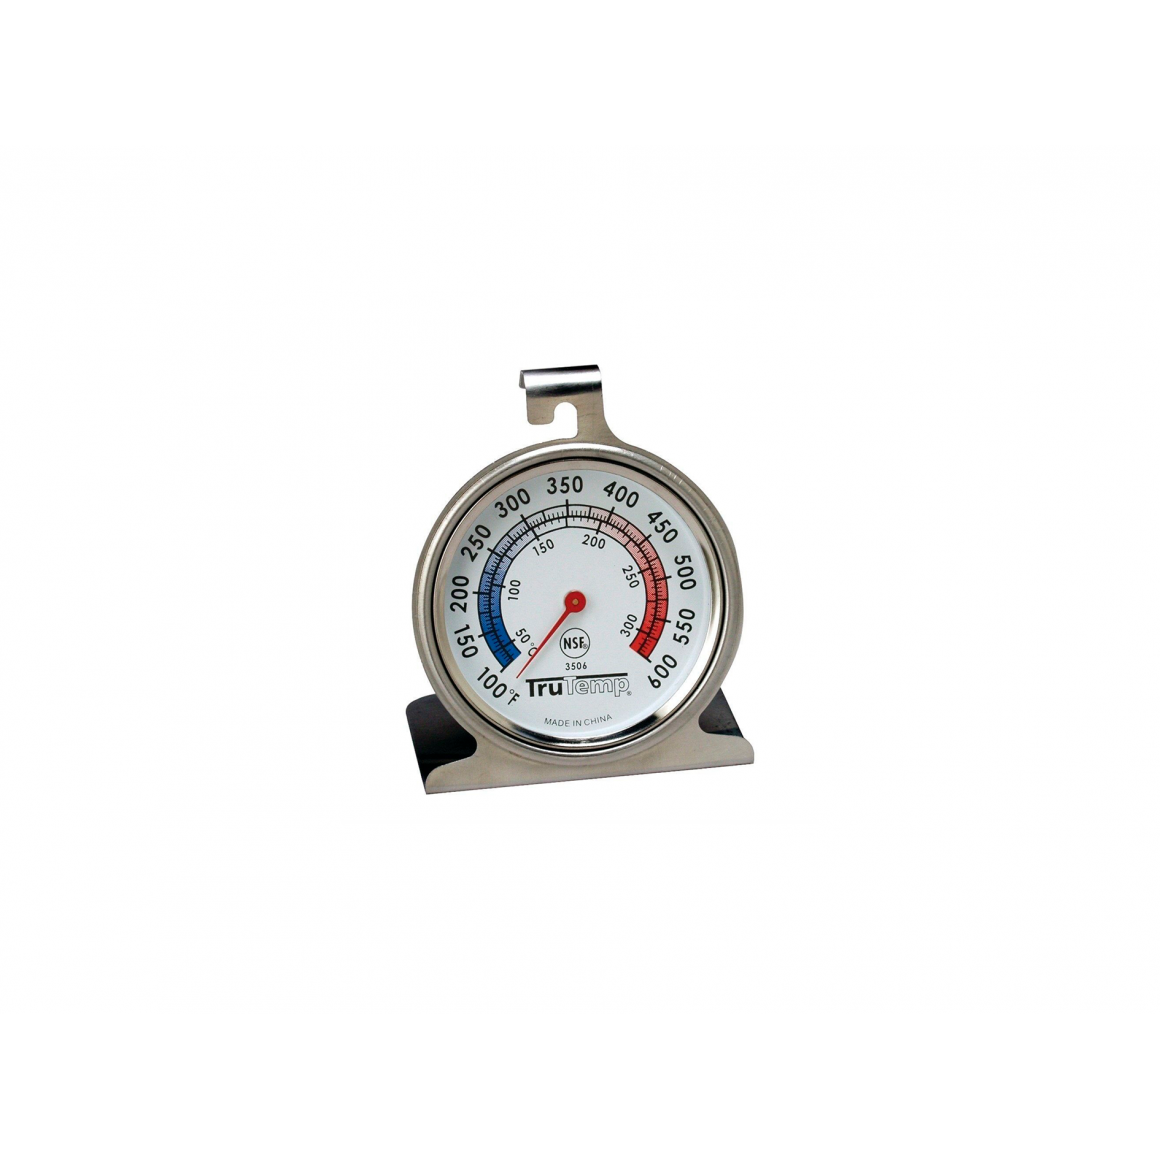 Oven dial thermometer